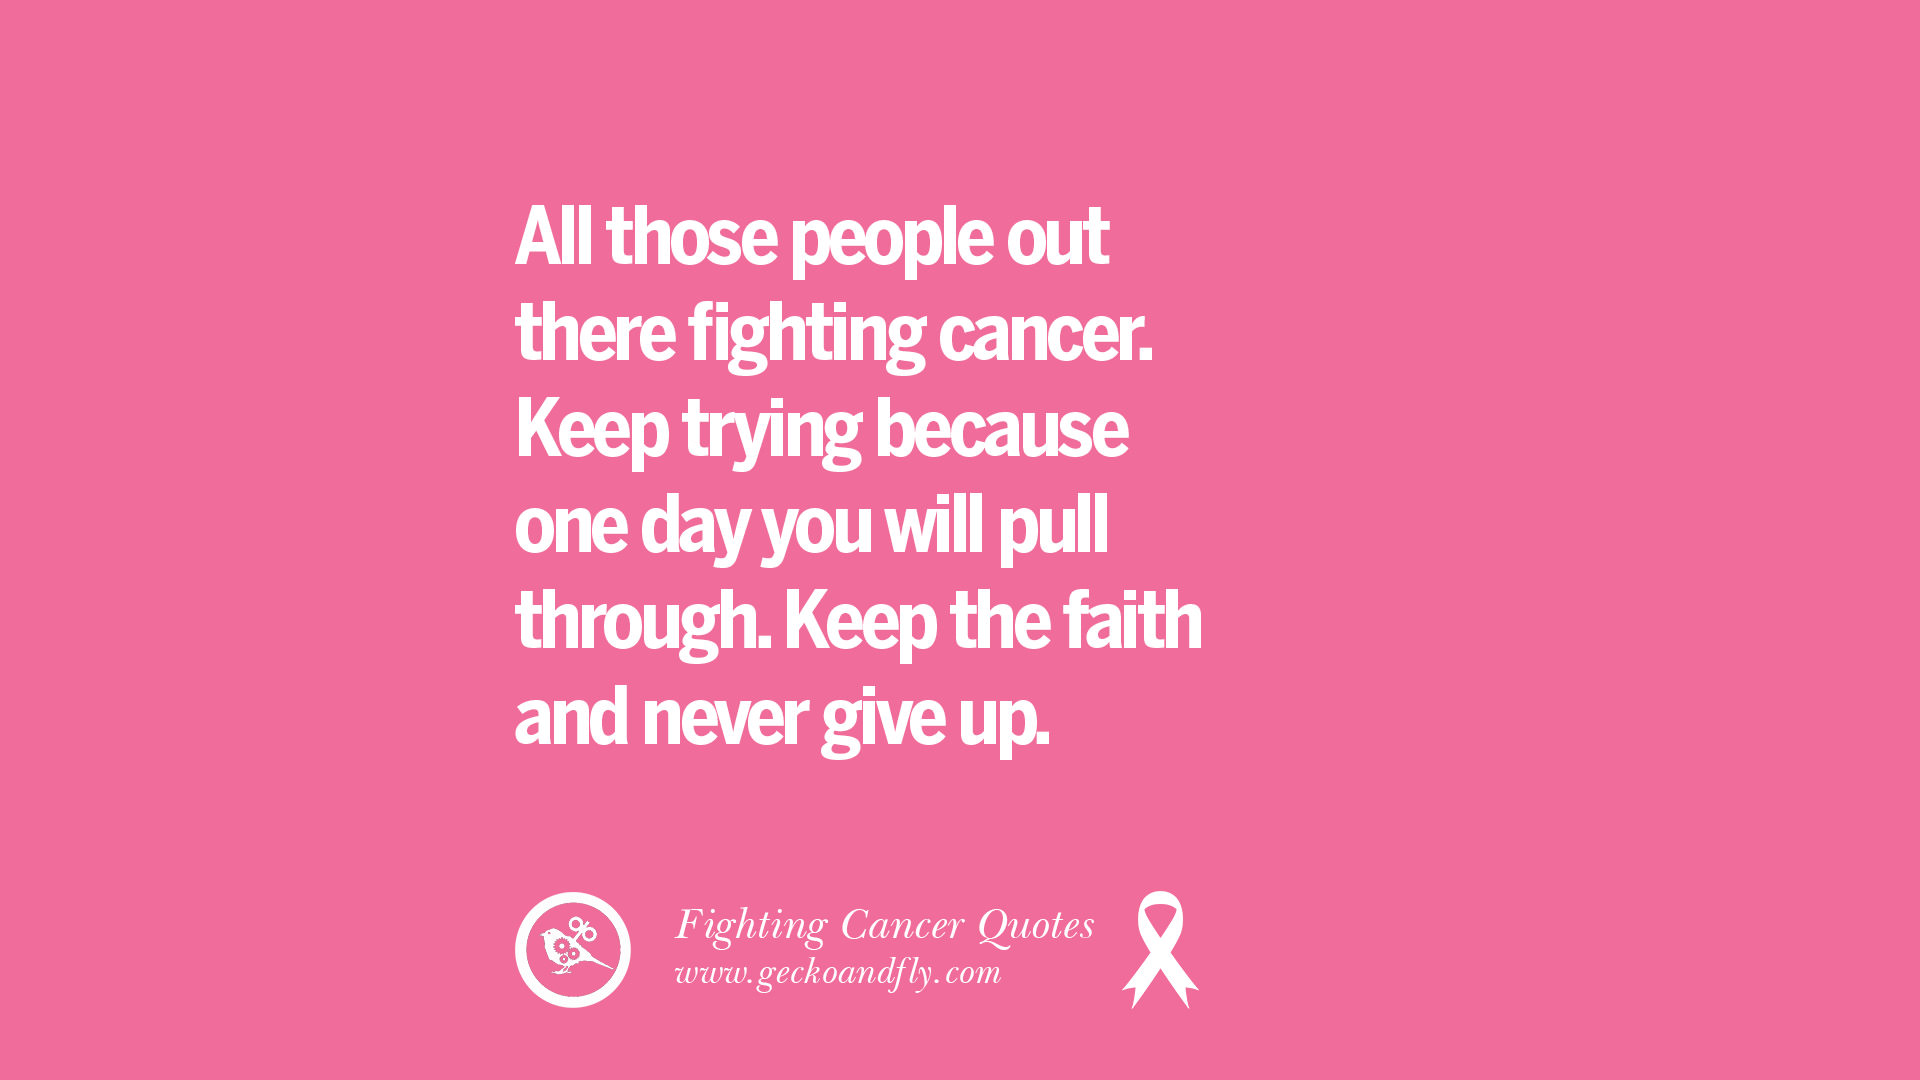 Download 30 Motivational Quotes On Fighting Cancer And Never Giving ...